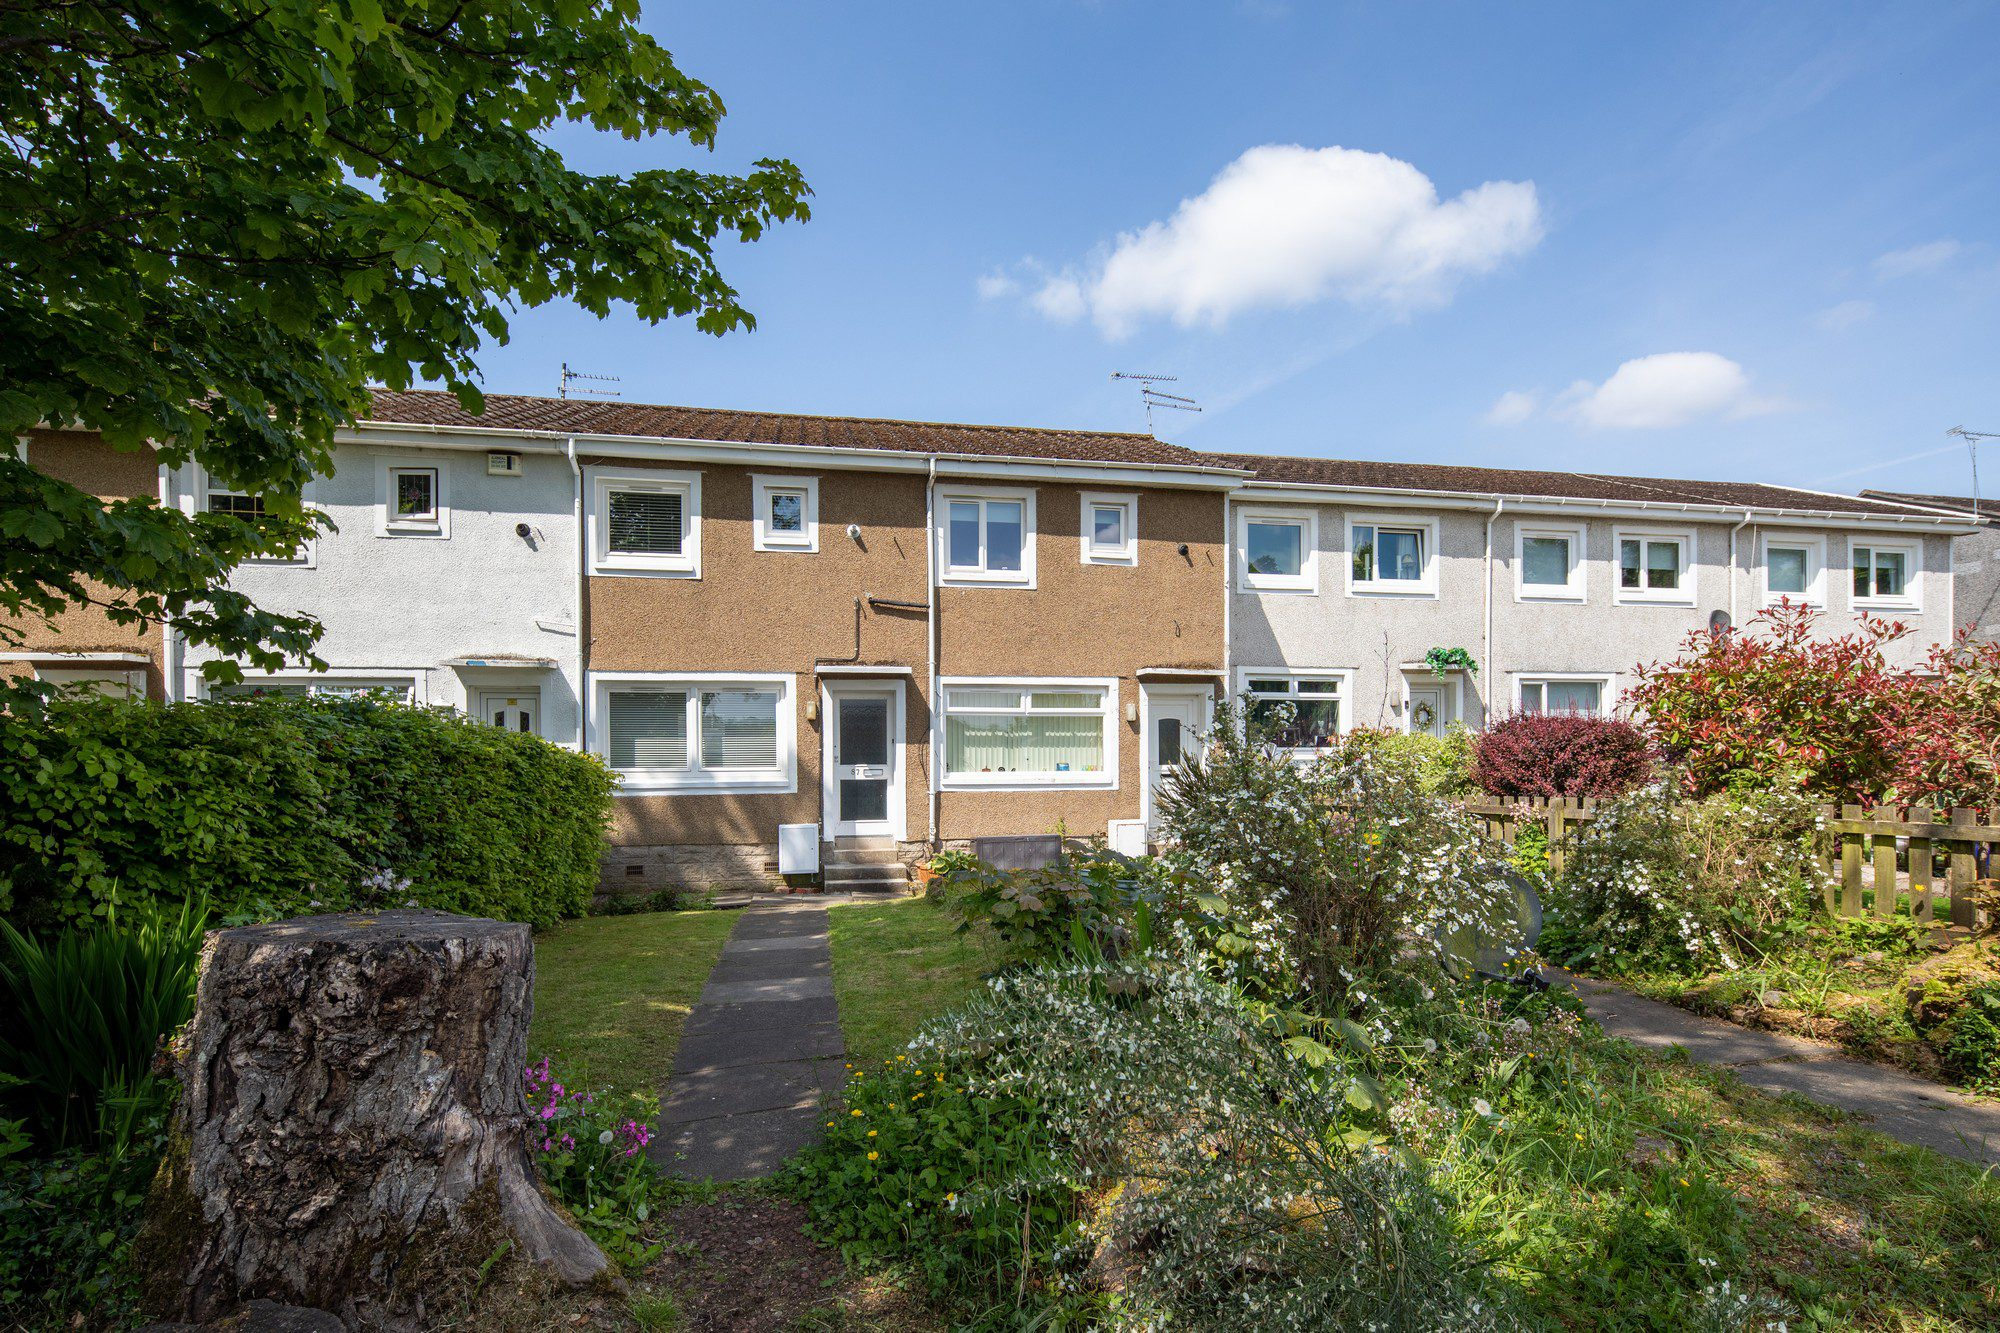 two bedroom properties available in newton Mearns close to local amenities 